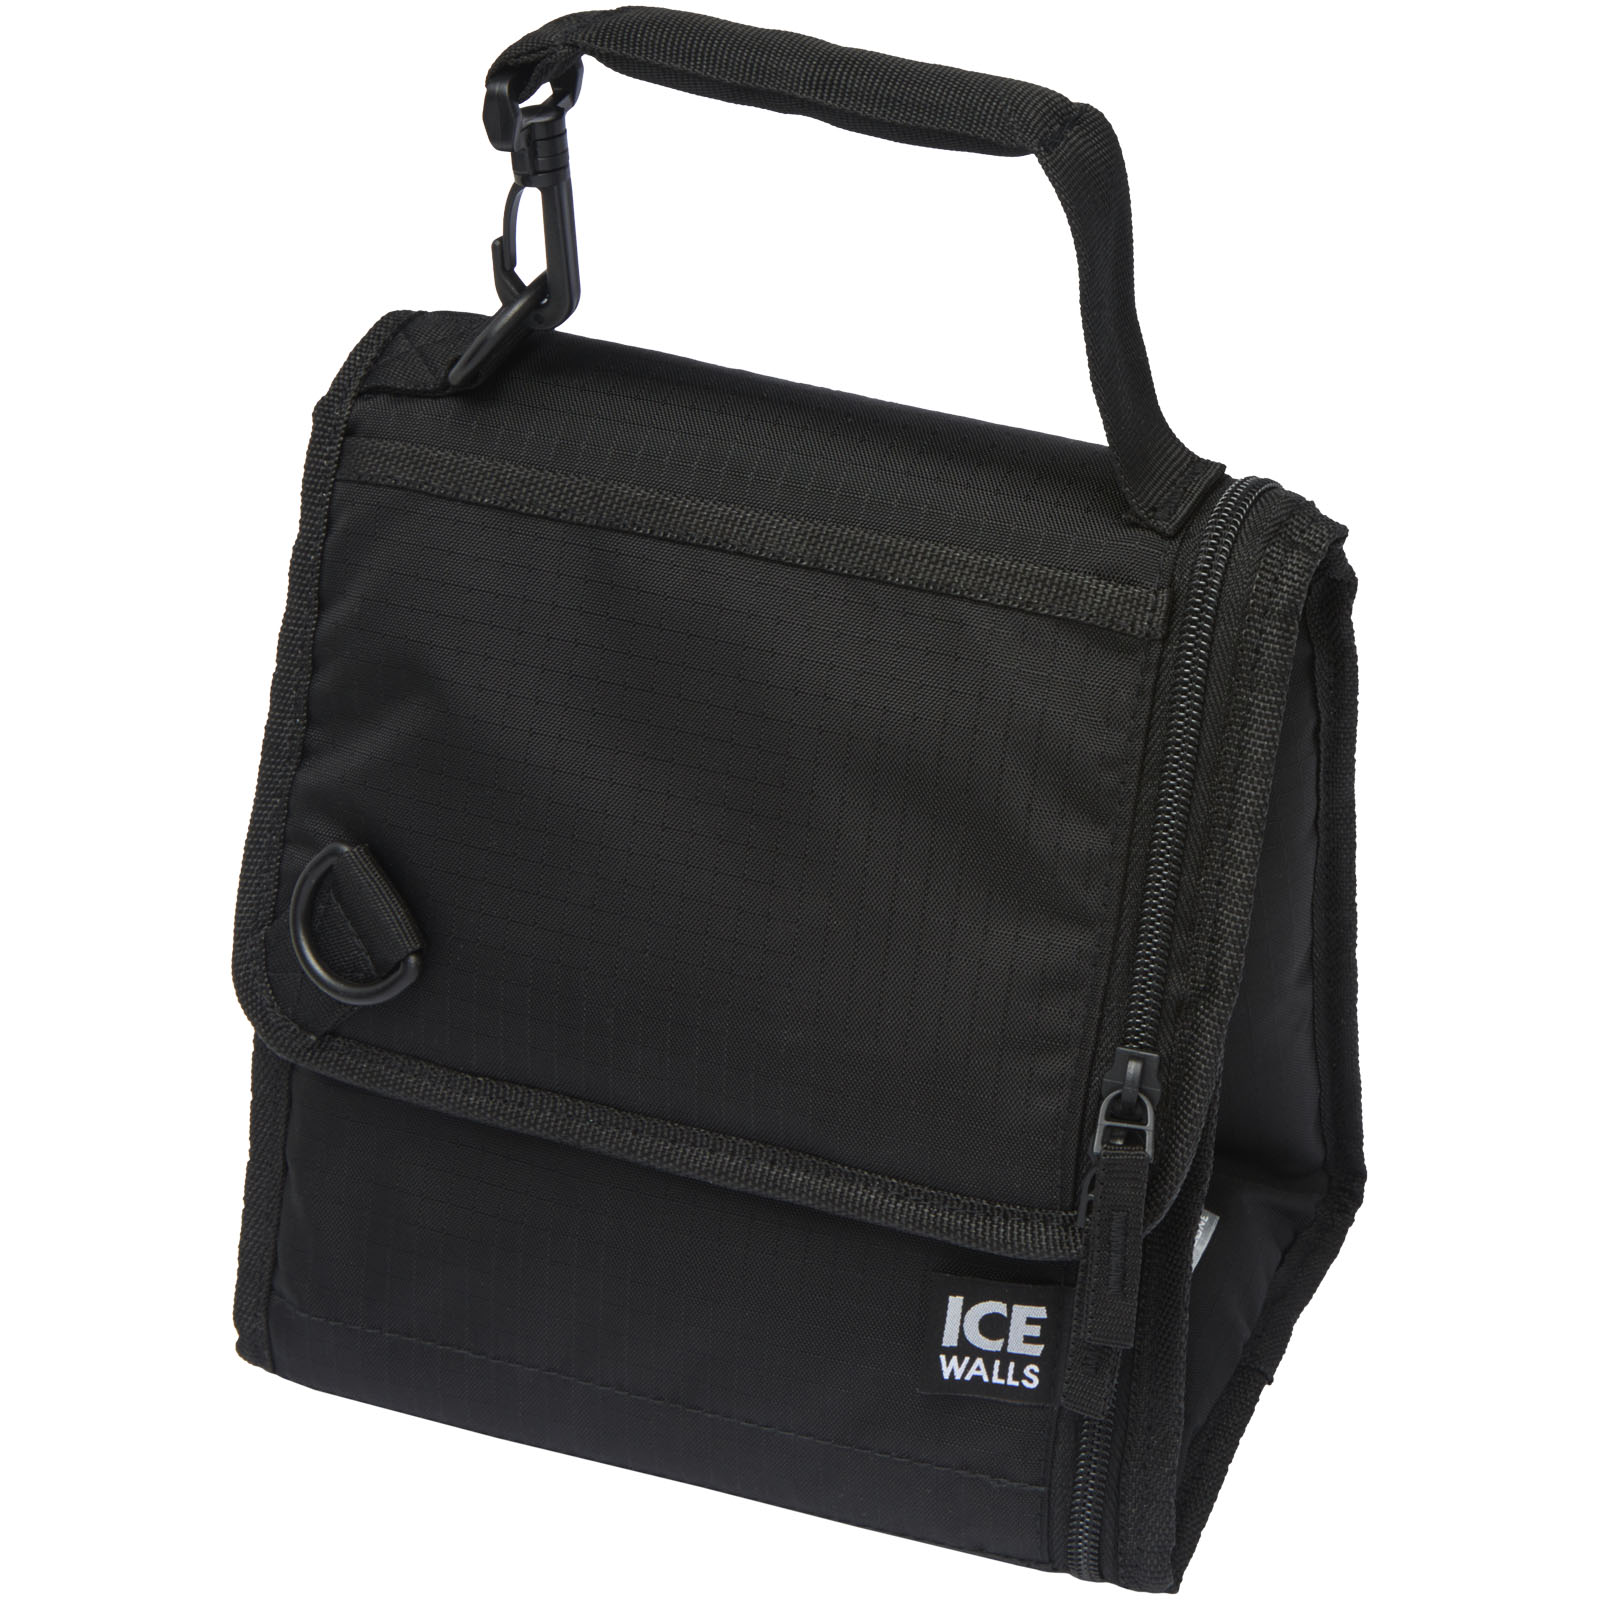 Advertising Cooler bags - Arctic Zone® Ice-wall lunch cooler bag 7L